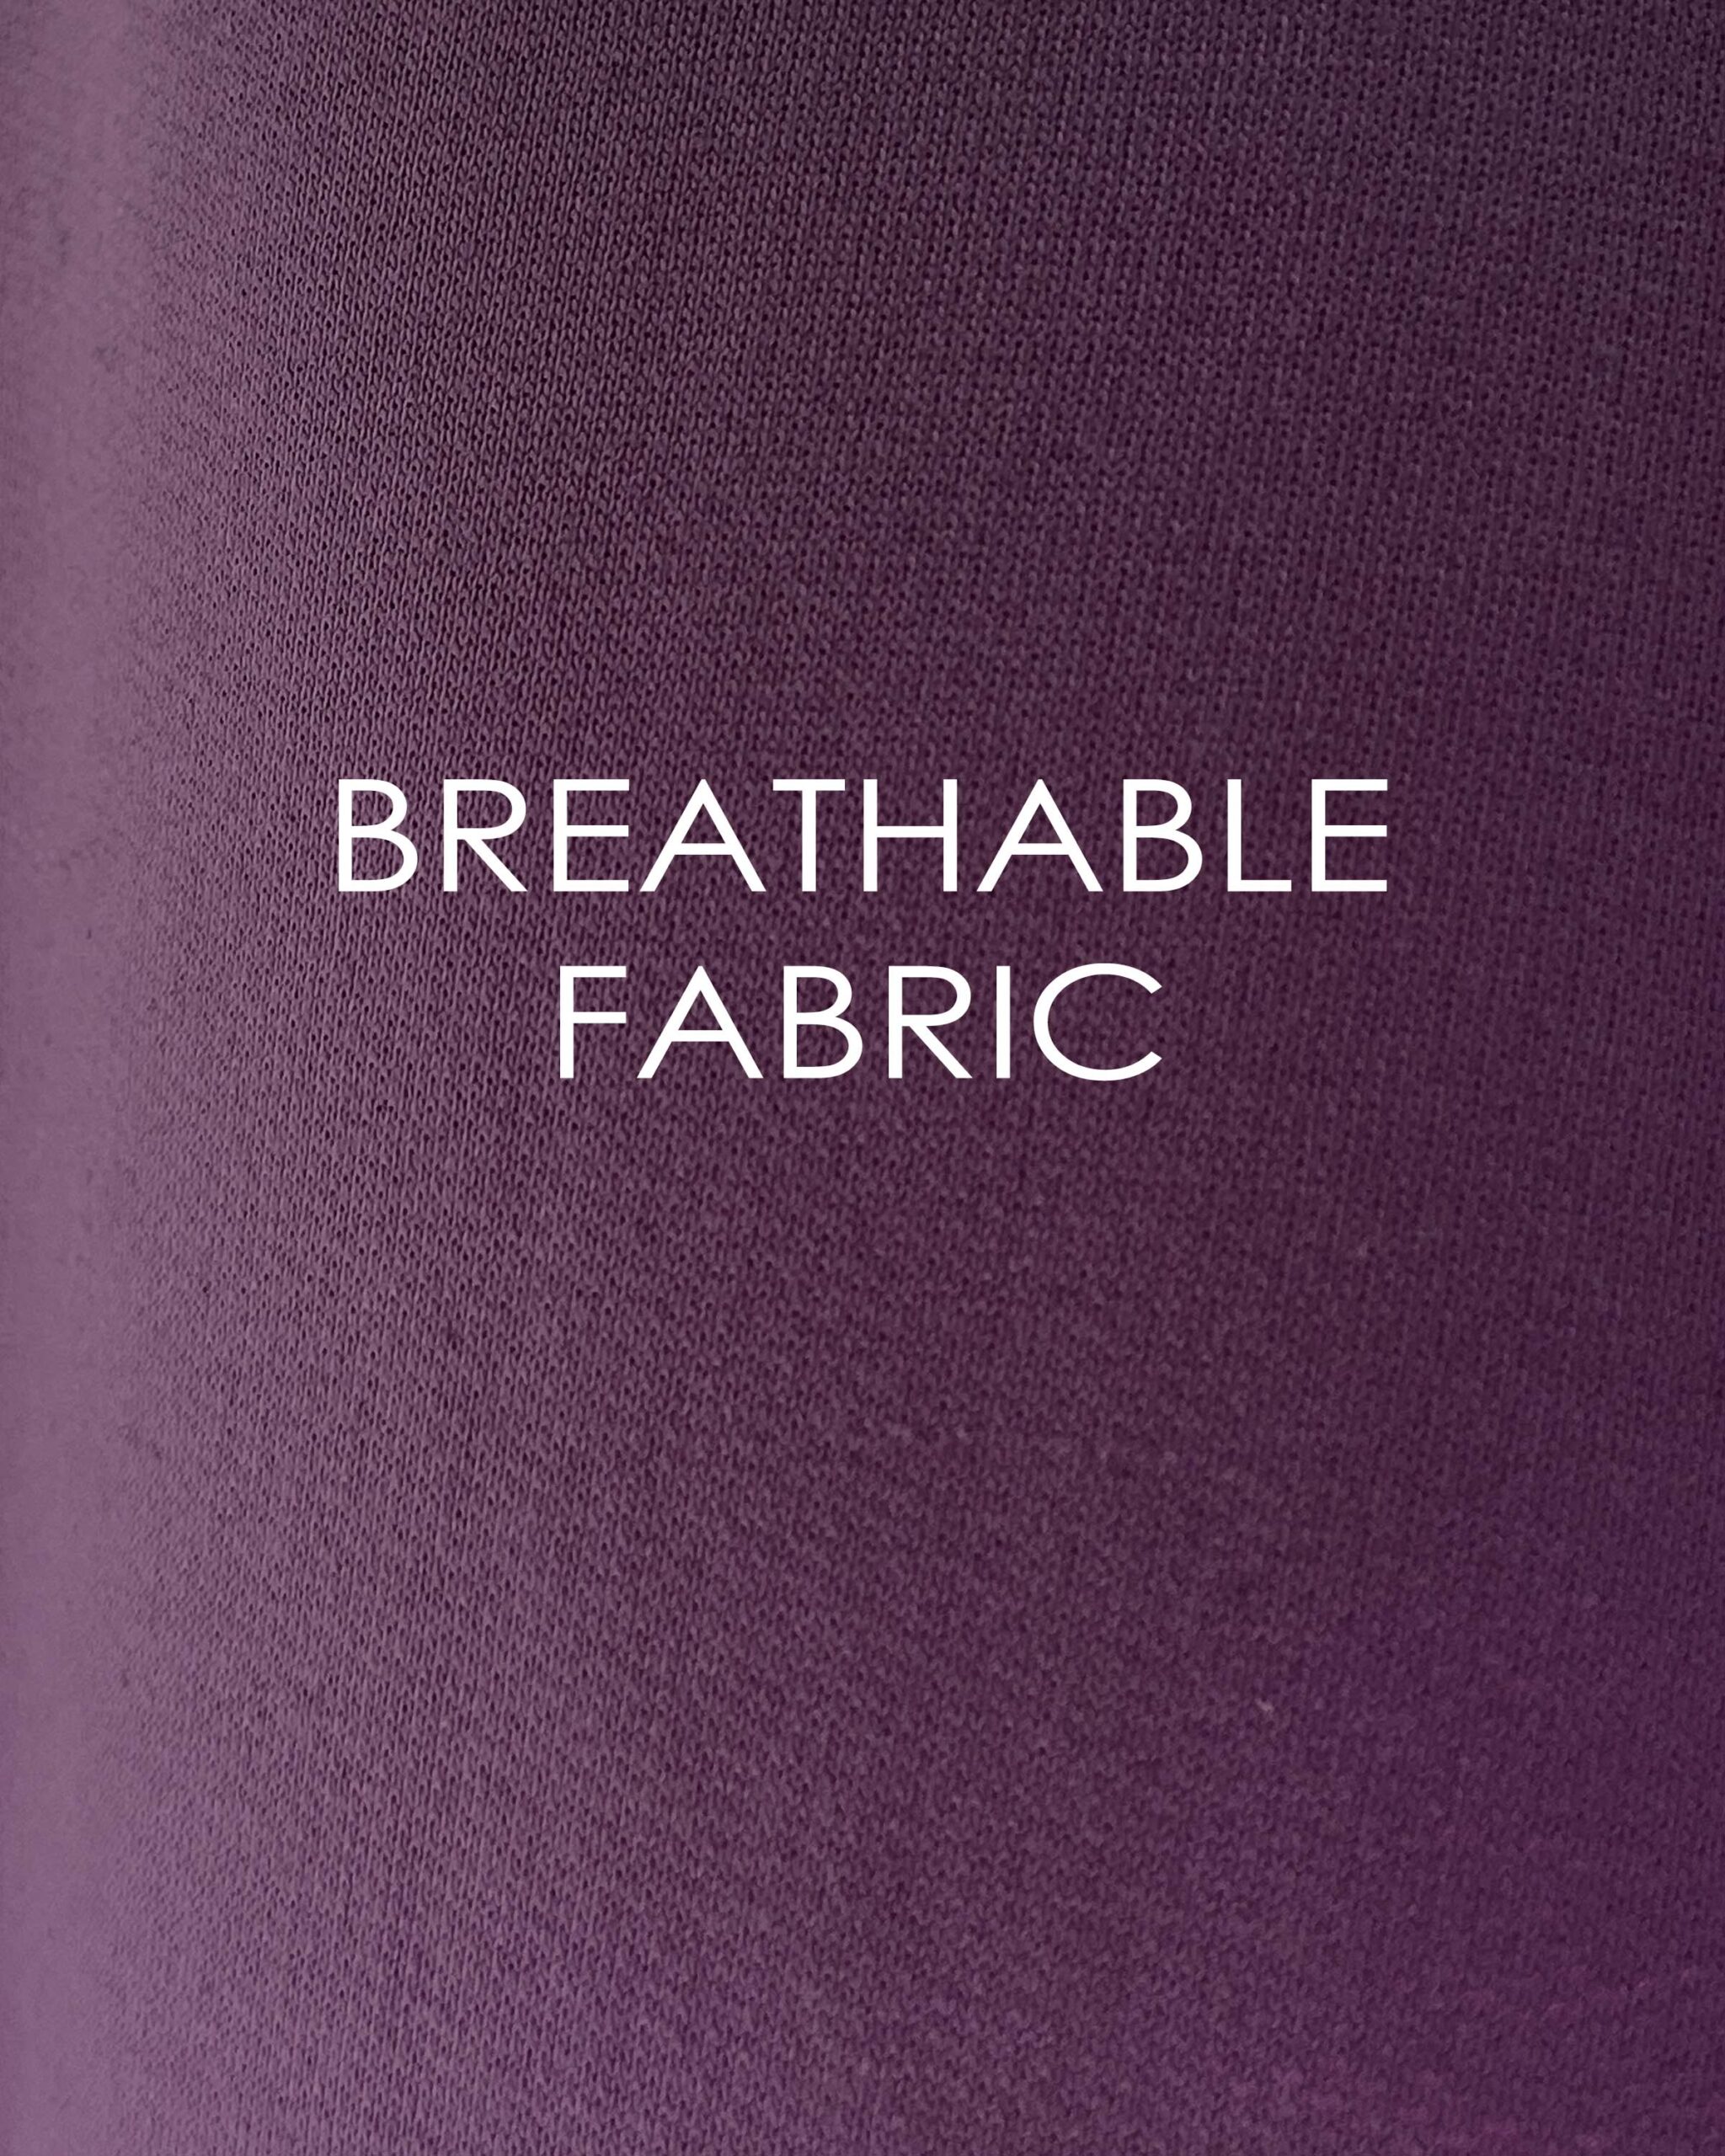 BREATHABLE FABRIC